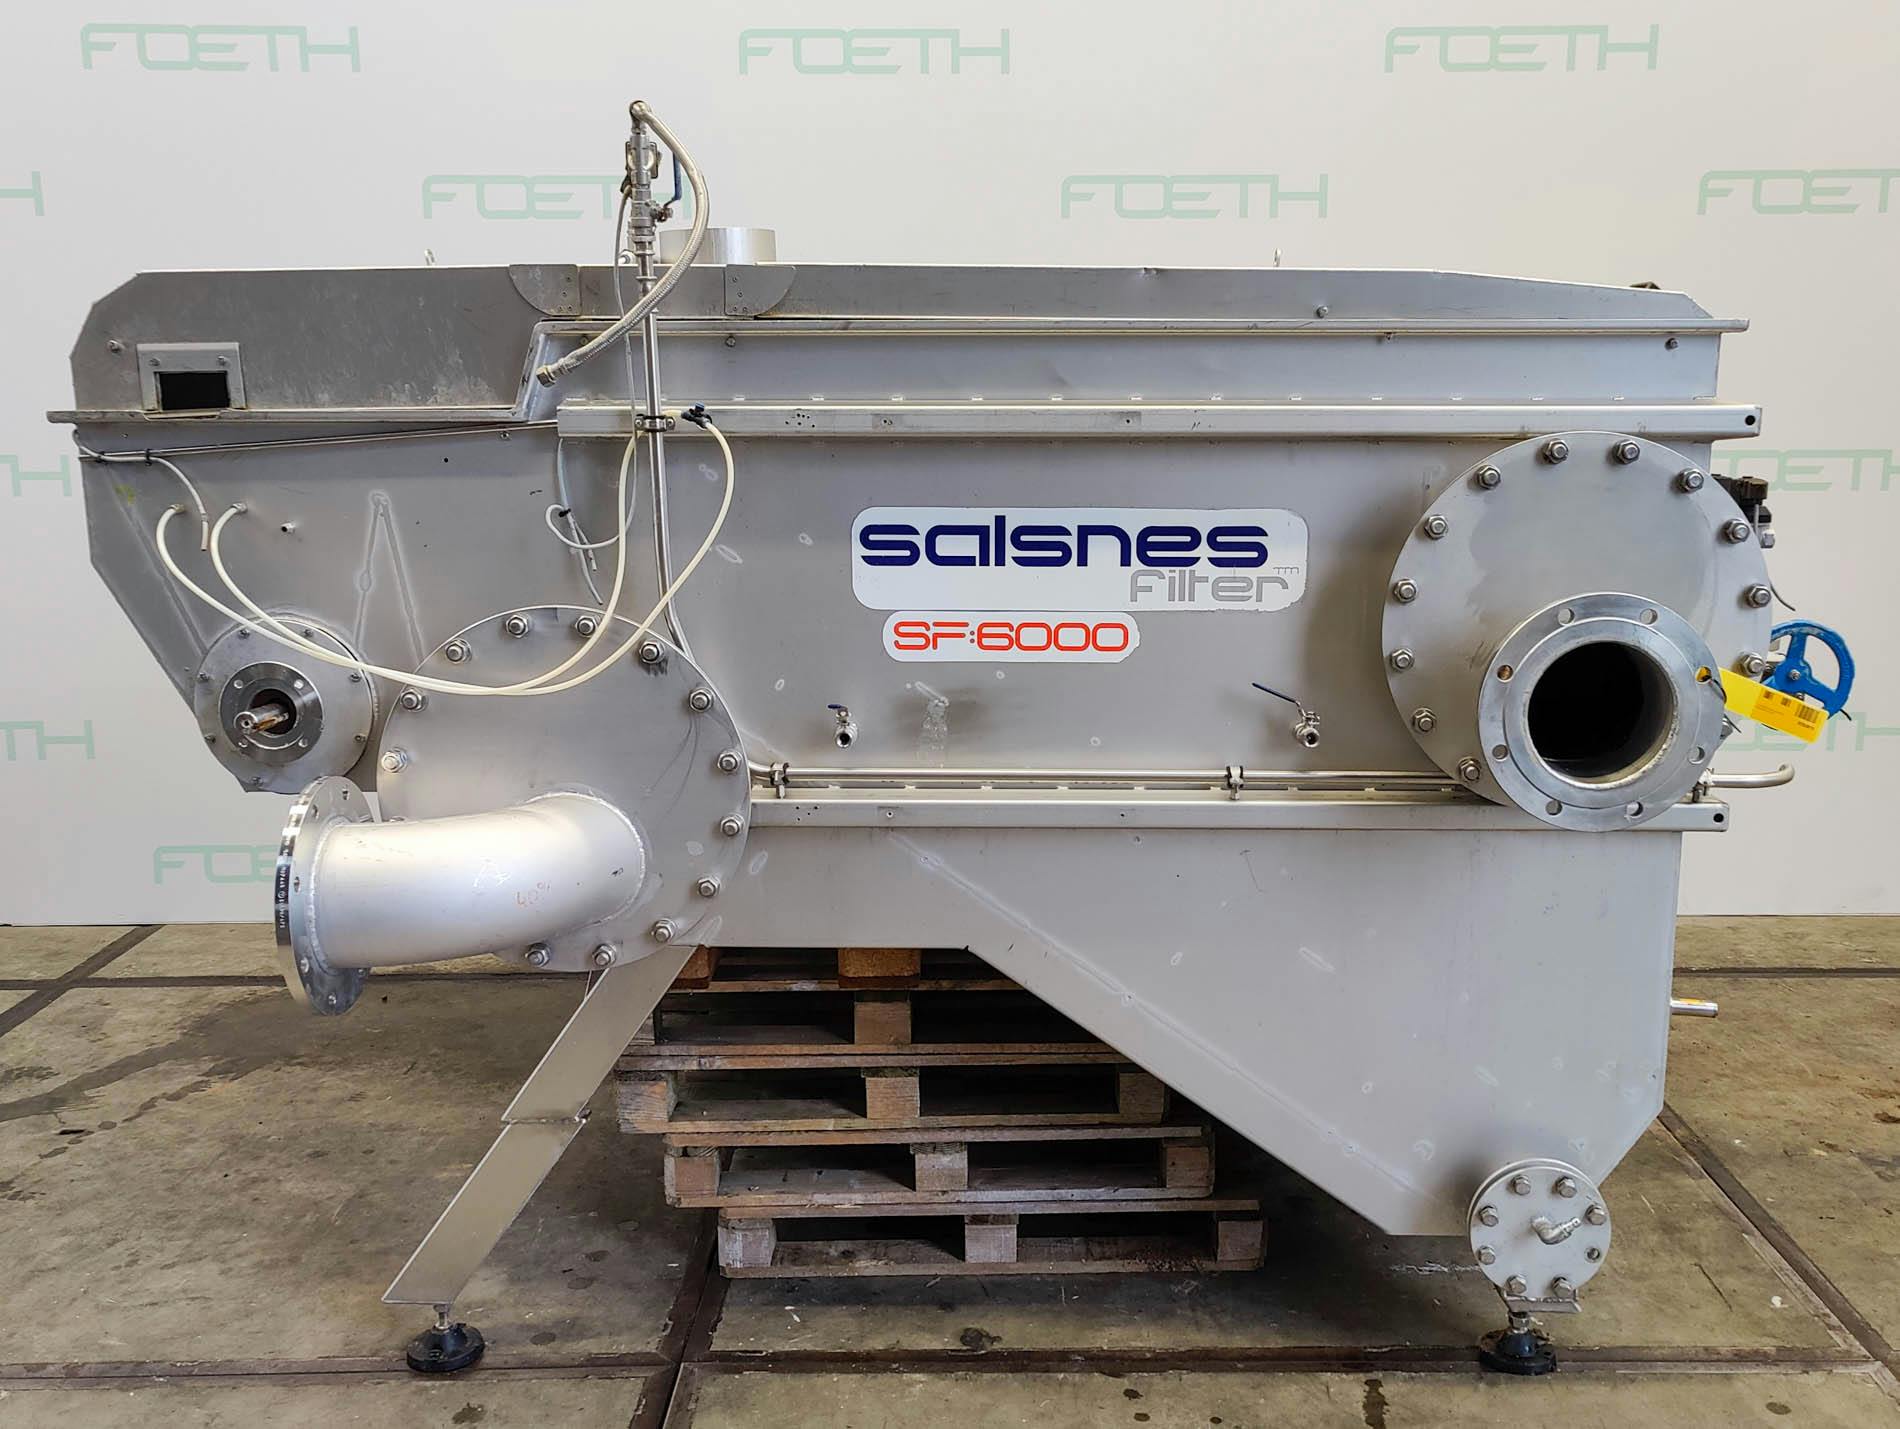 Salsnes 6000 "Solids Separation with Integrated Sludge Thickening and Dewatering" - Filter - image 1